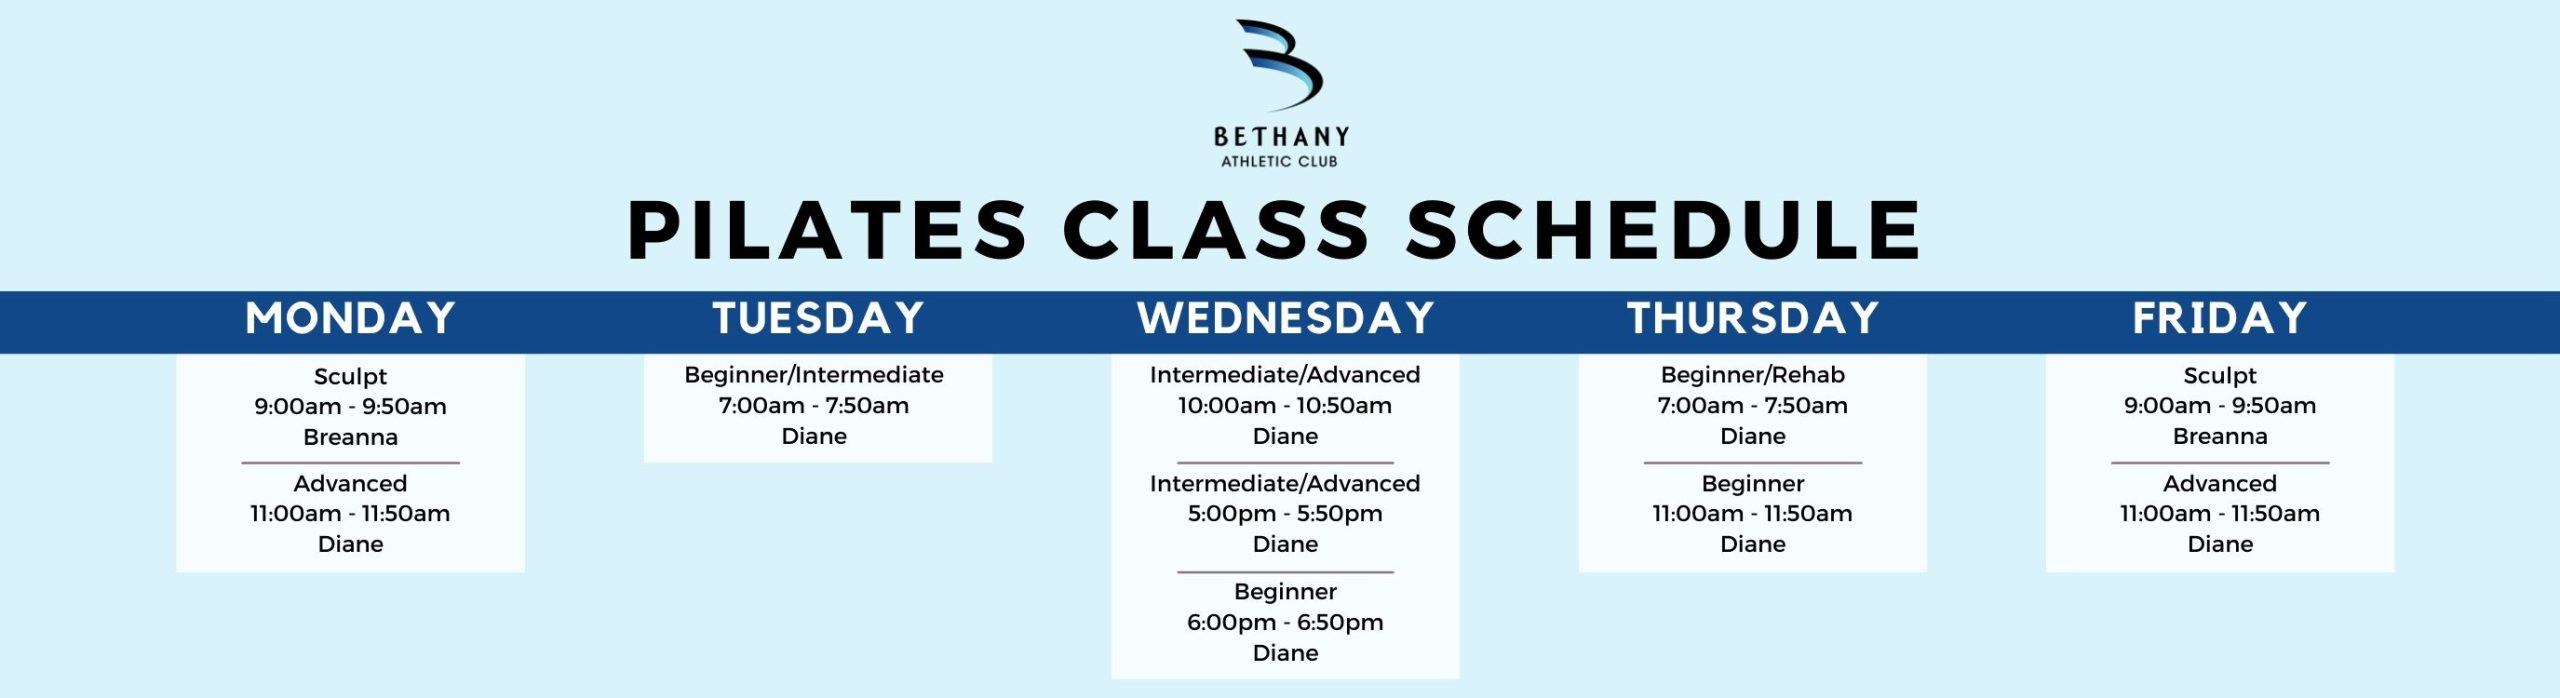 Pilates Schedule at Bethany Athletic Club in Portland Oregon